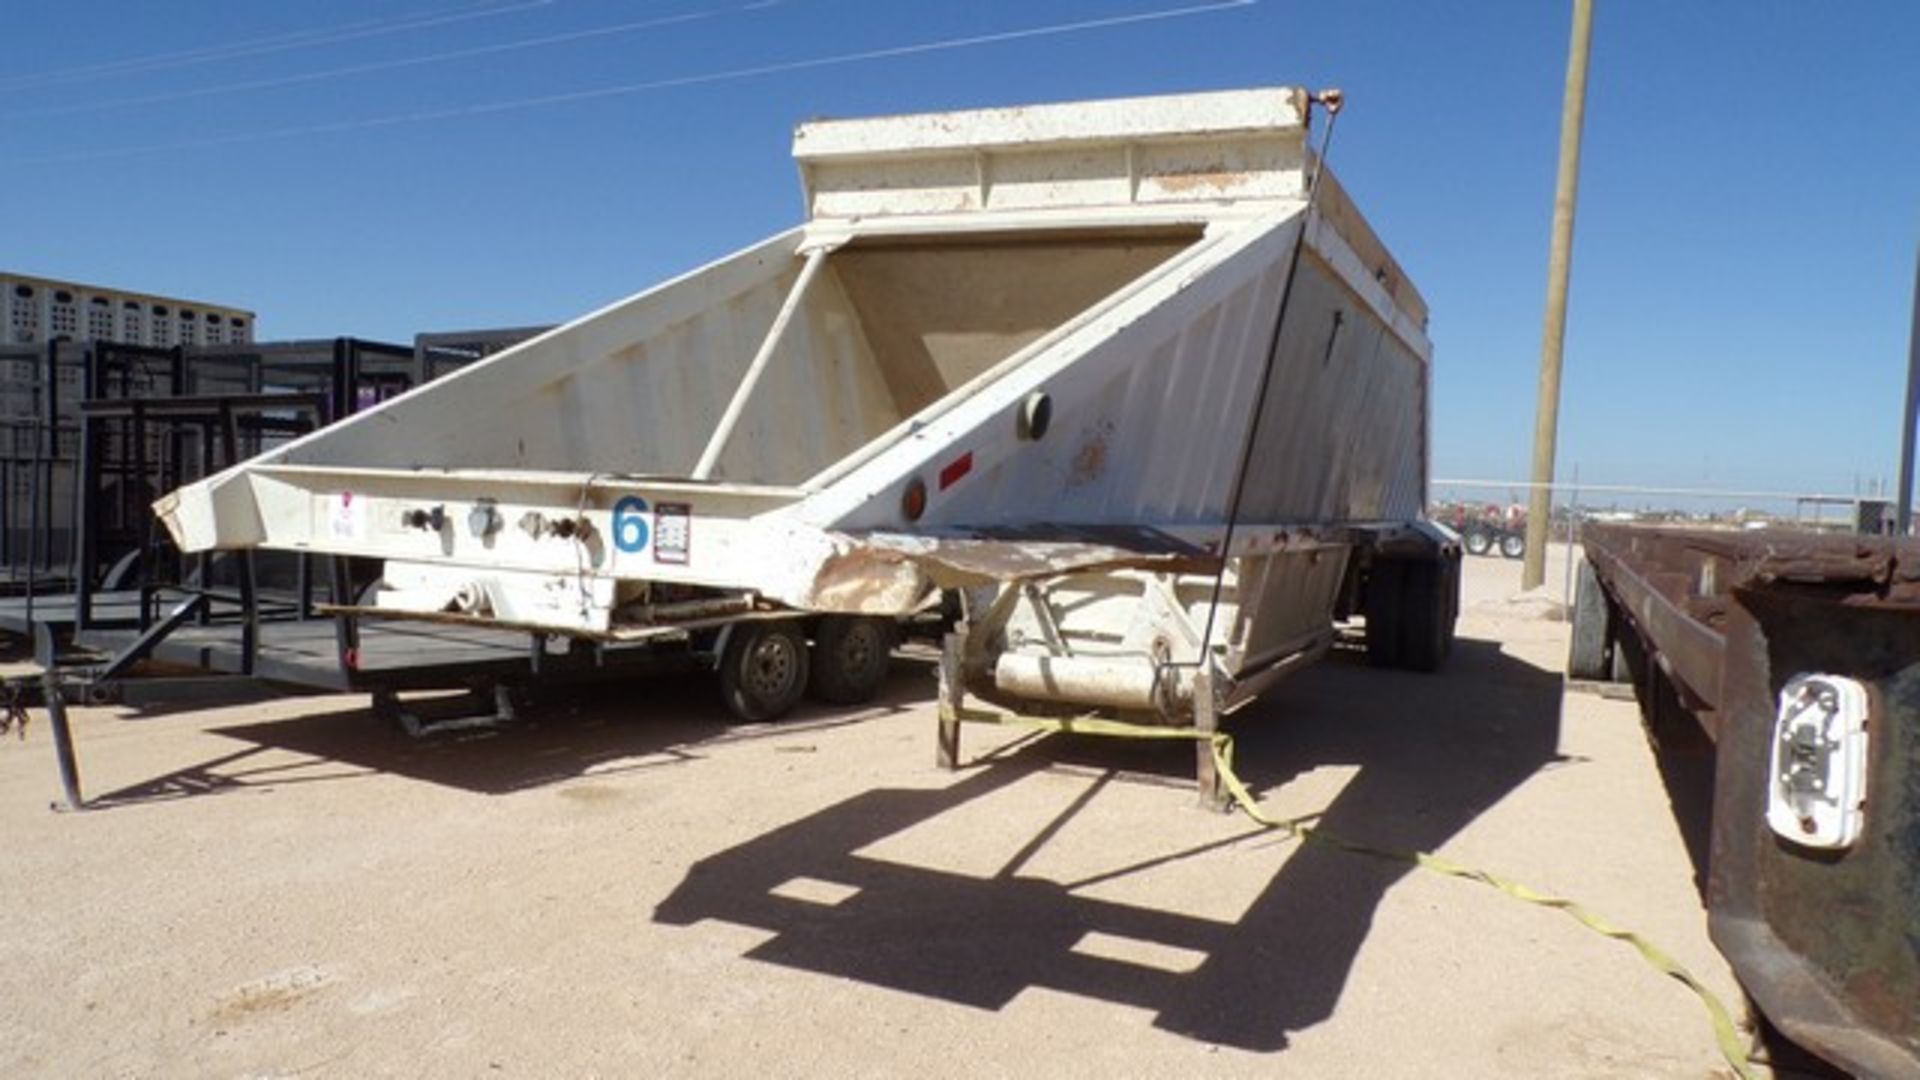 Located in YARD 1 - Midland, TX (2355) (X) 2007 CONSTRUCTION TRAILER SPECIALIST T/A BDT40 BELLY DUMP - Image 2 of 5